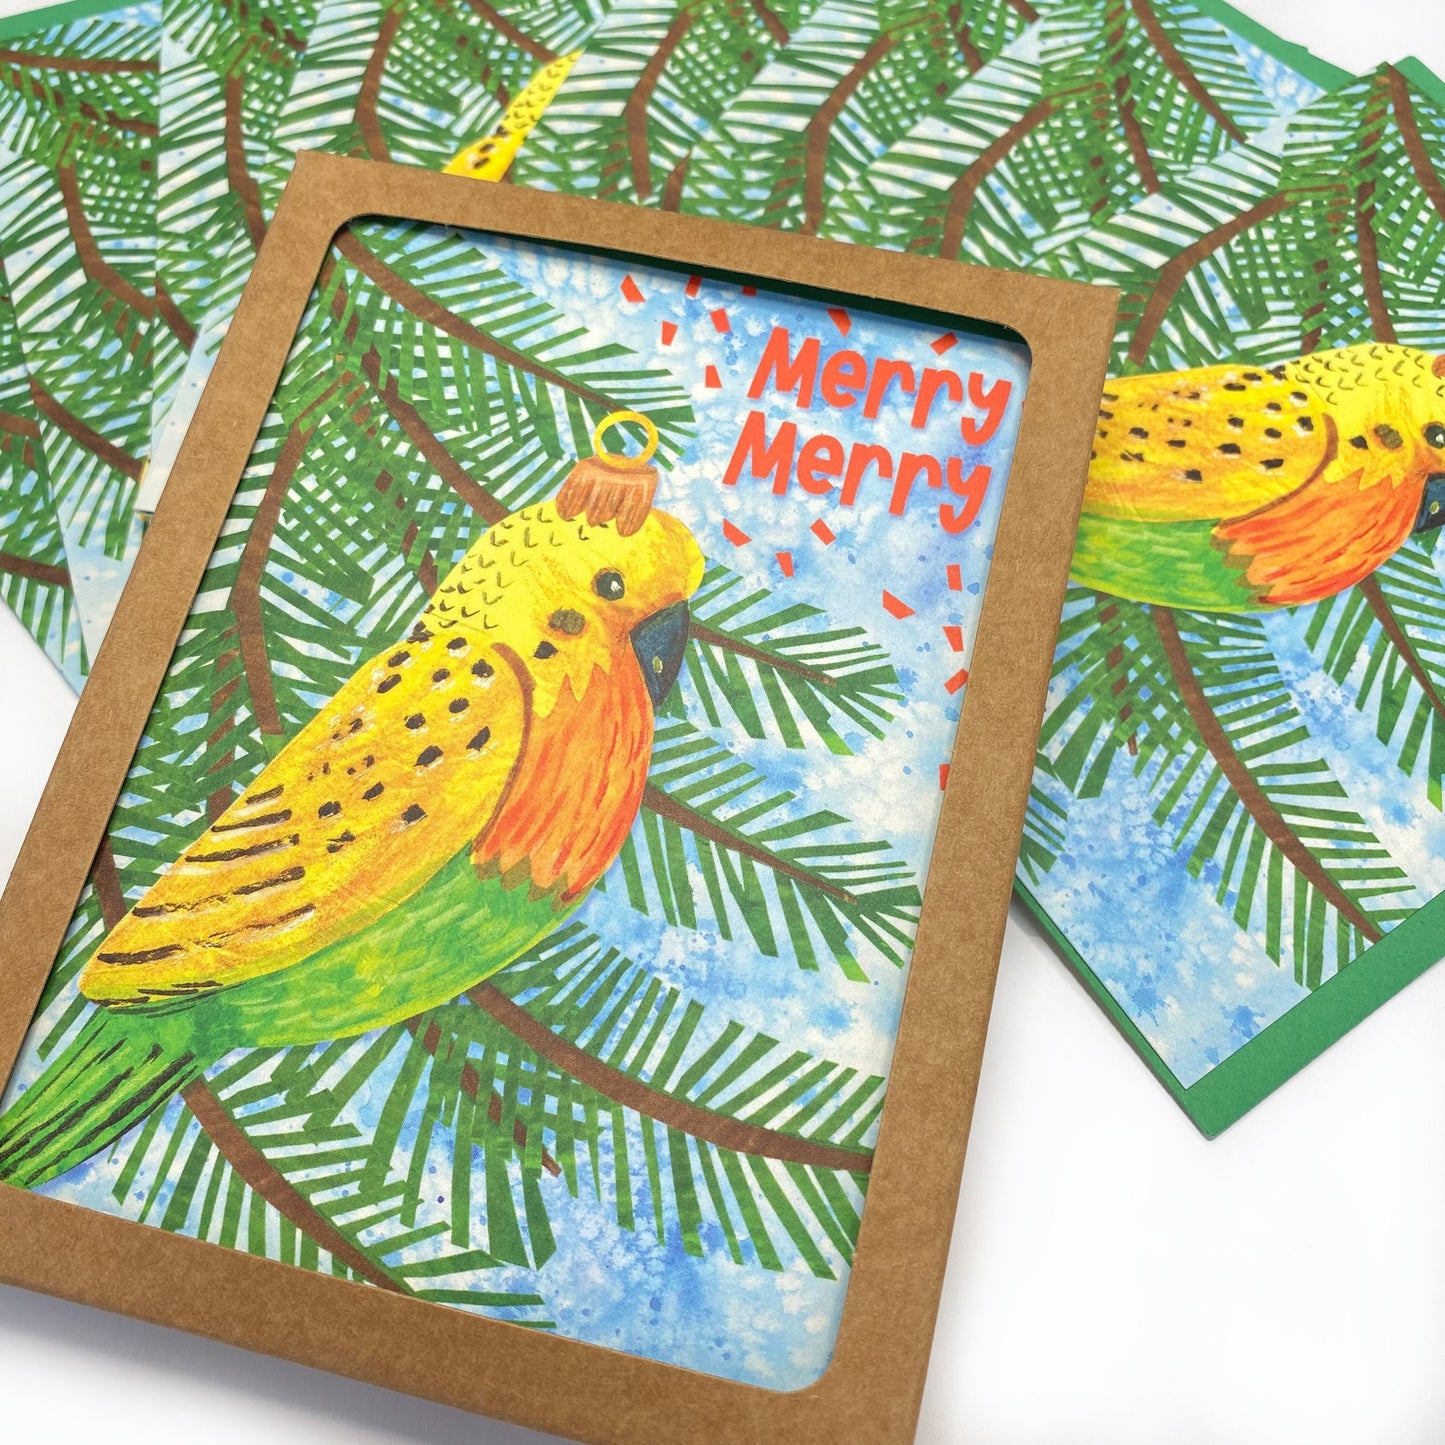 Boxed Set of 8 Cards-Merry Merry Parakeet Ornament Greeting Cards